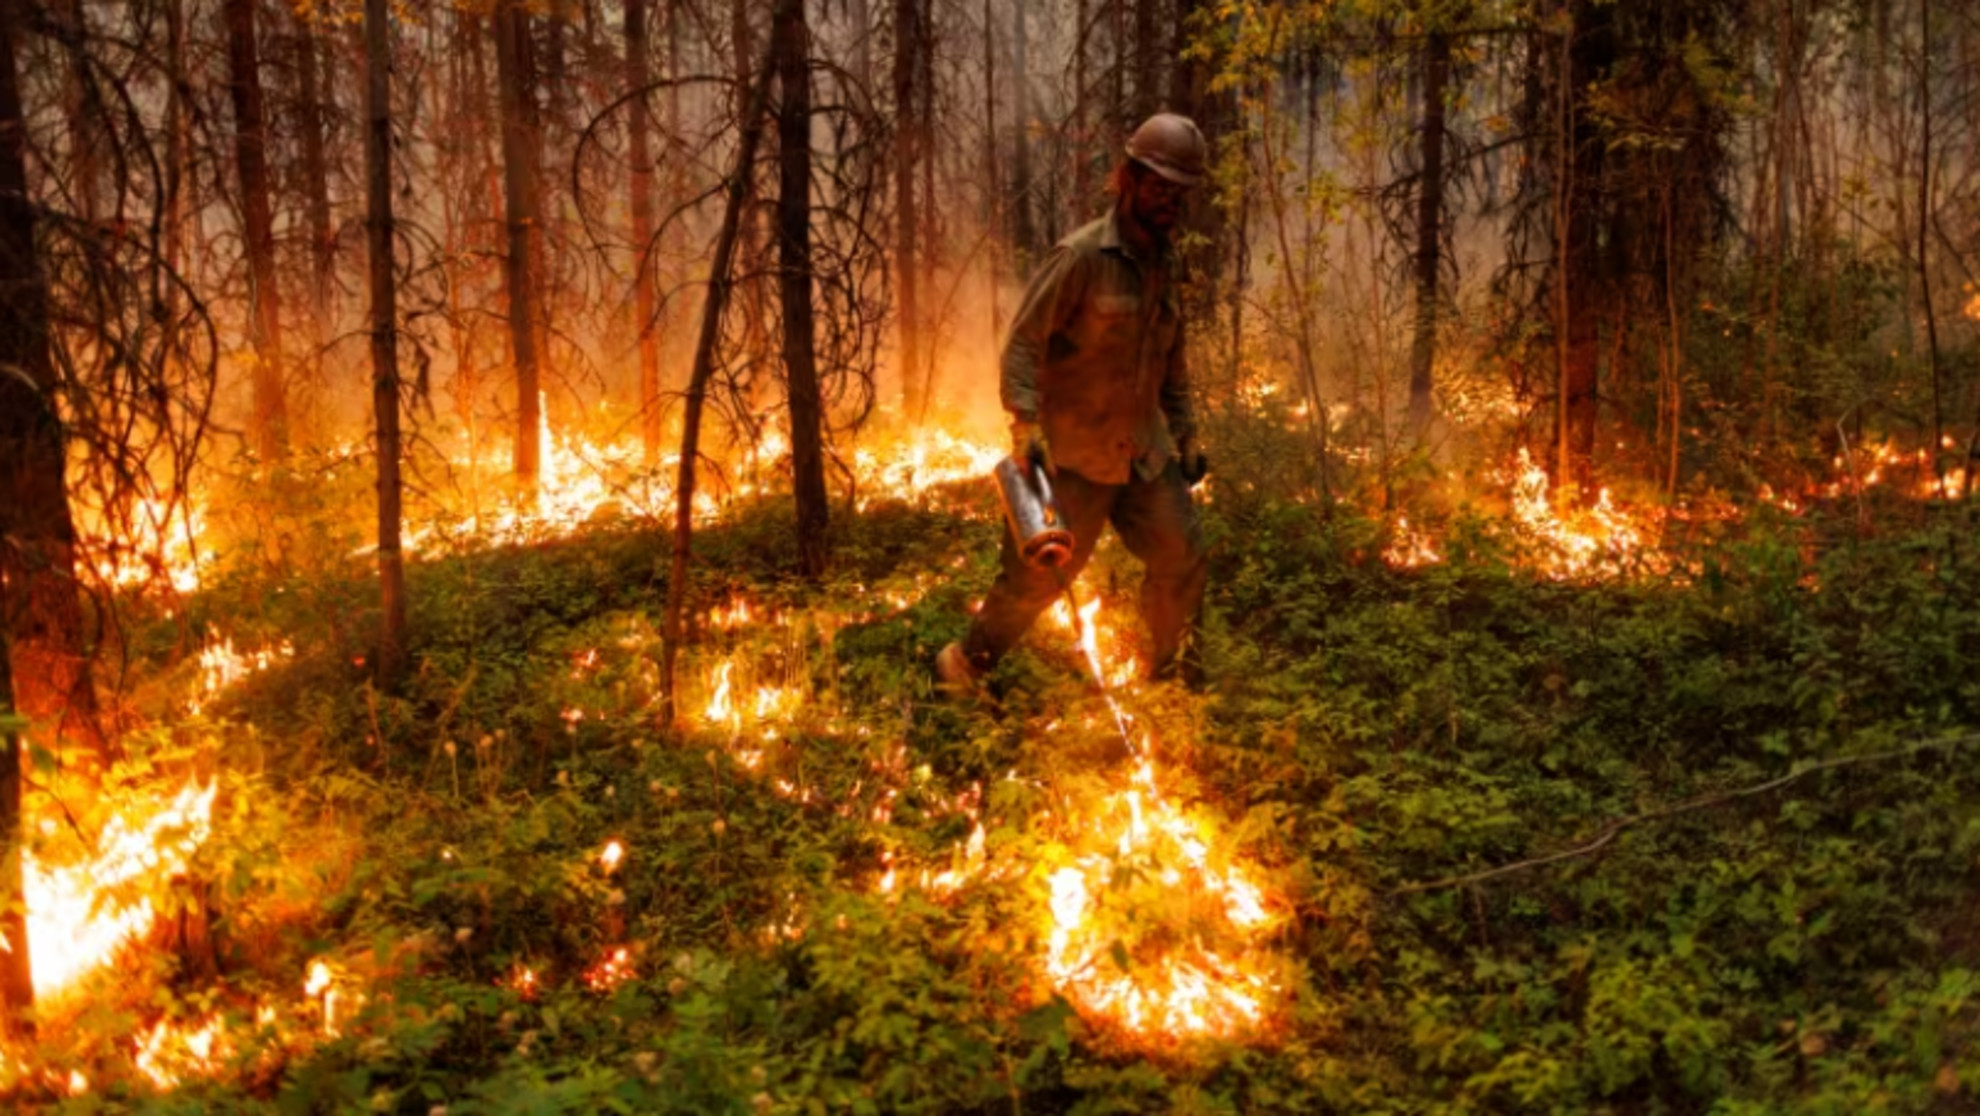 Experts advise B.C. residents to prepare early for wildfire season